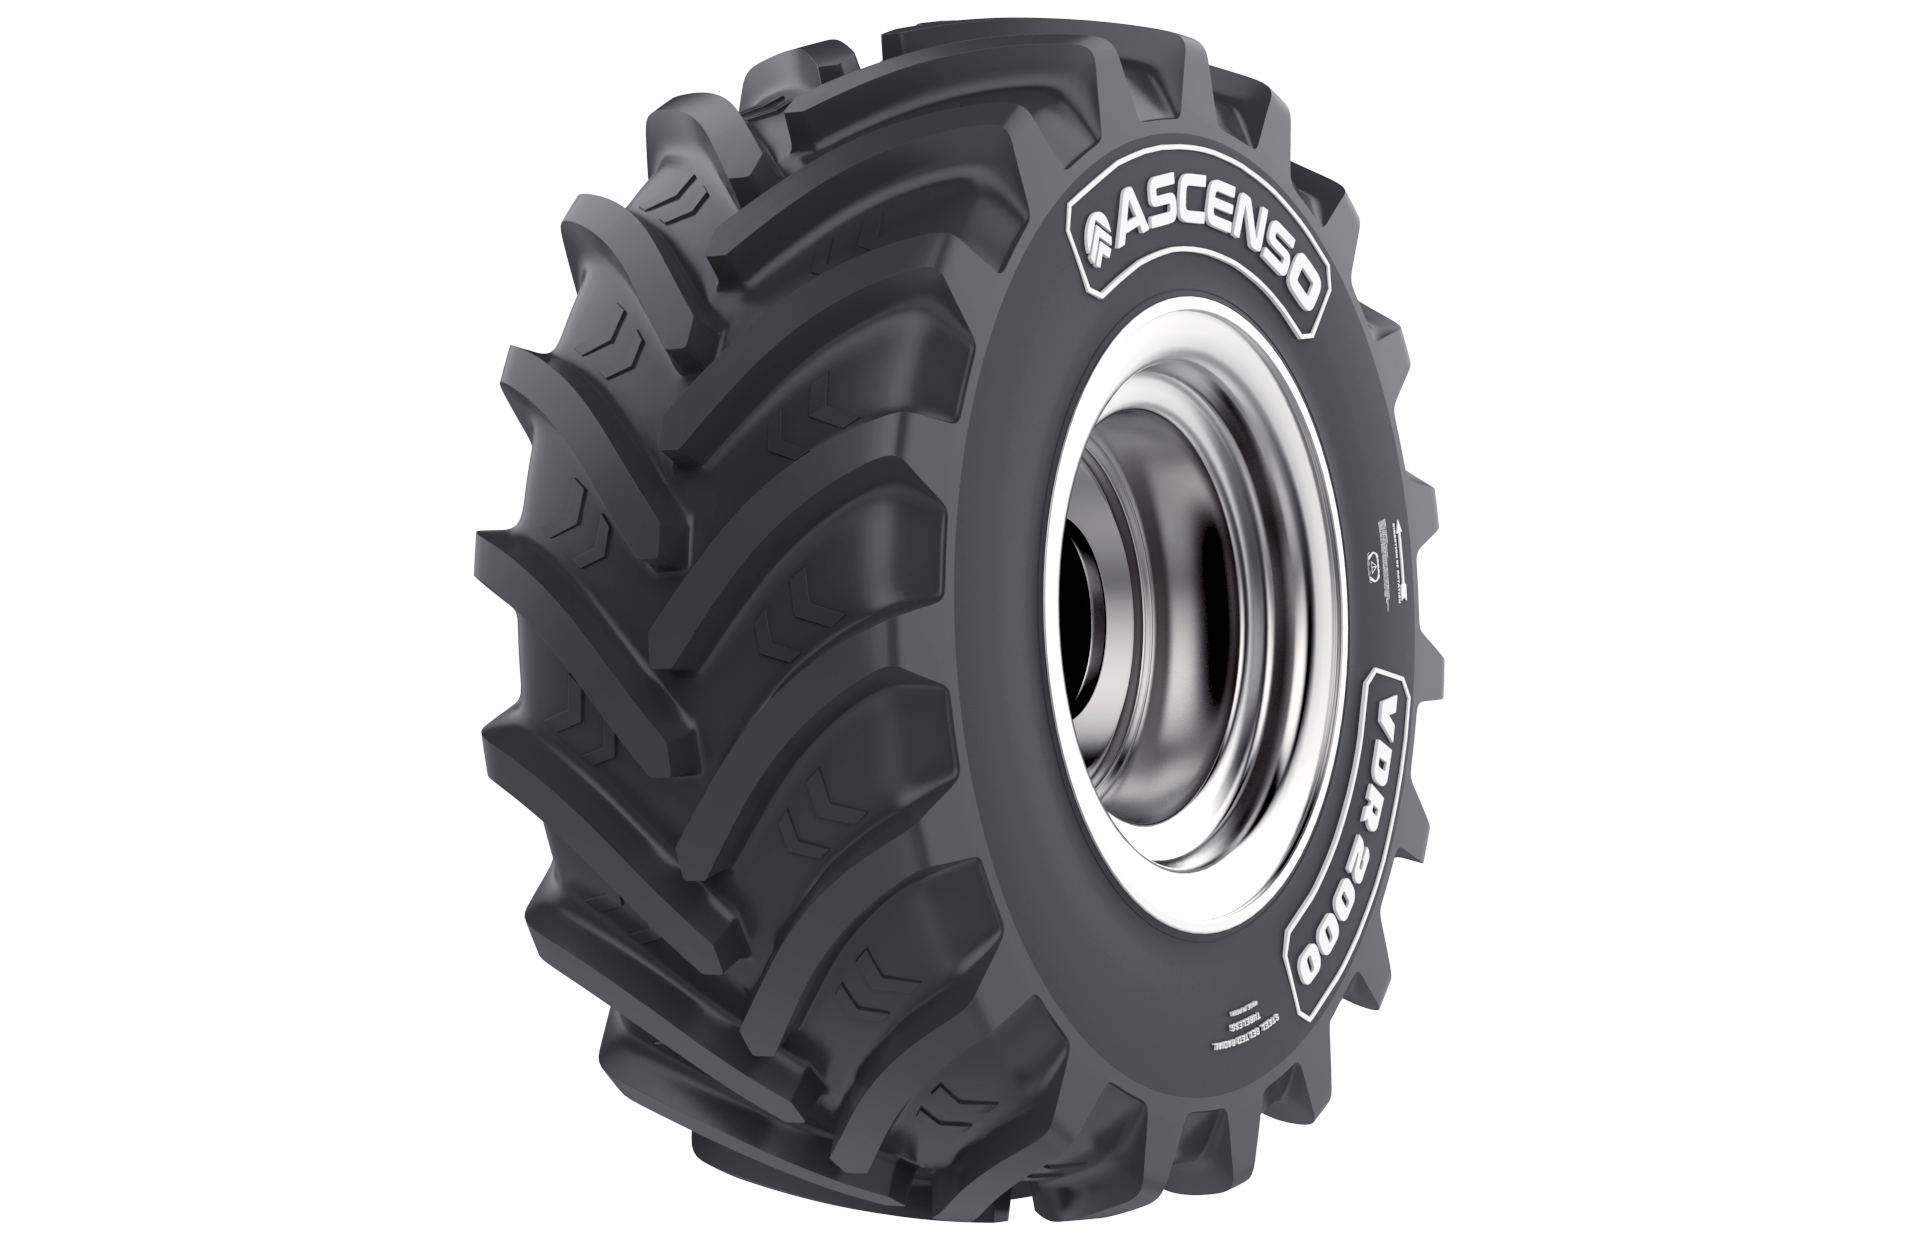 ASCENSO VF 600/65R28 NRO 163D R1-W TL VDR2000 STEEL BELTED